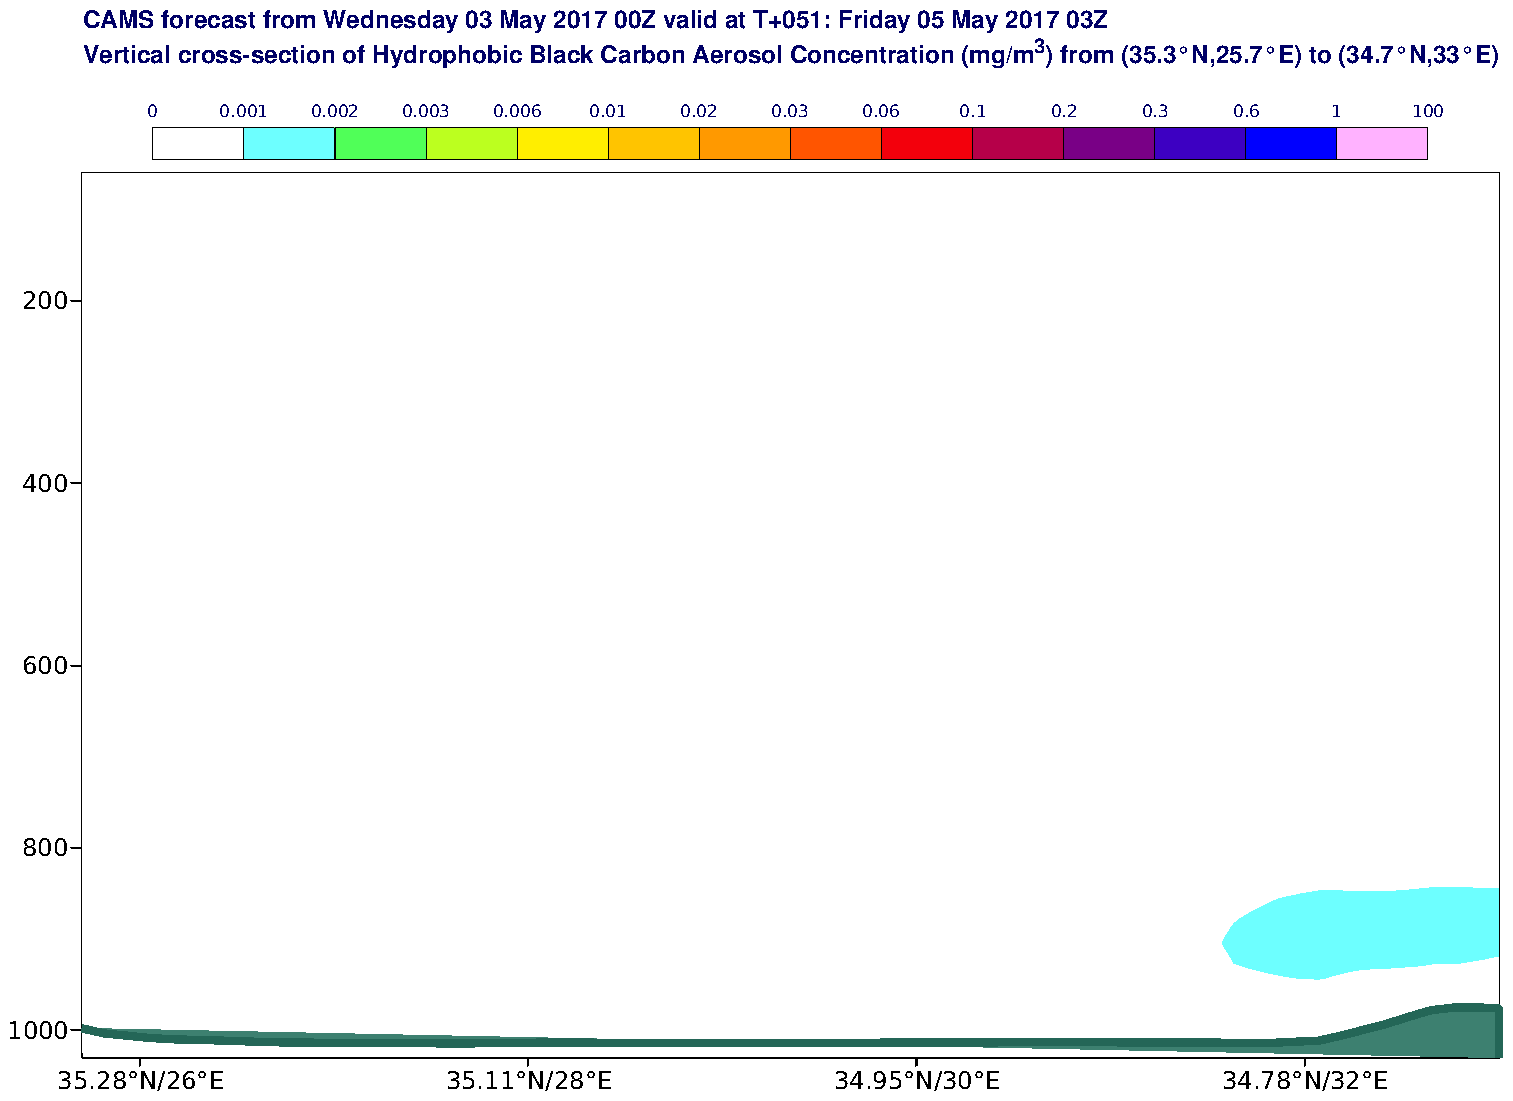 Vertical cross-section of Hydrophobic Black Carbon Aerosol Concentration (mg/m3) valid at T51 - 2017-05-05 03:00